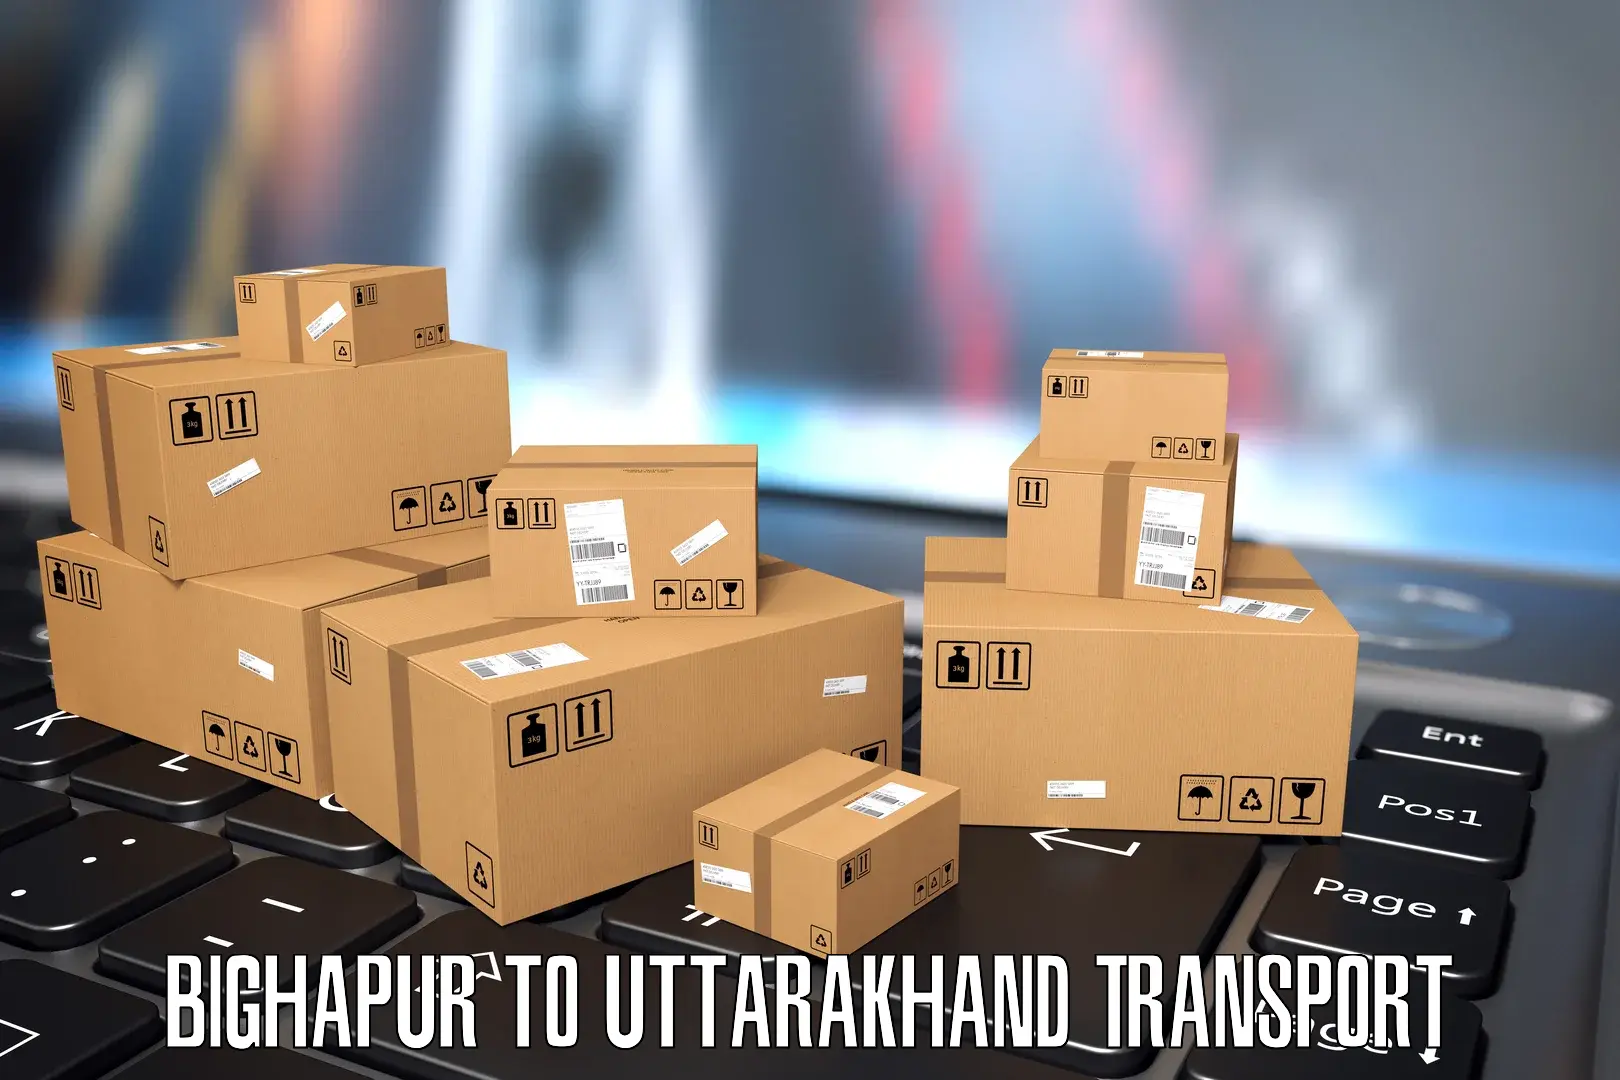 Express transport services Bighapur to Roorkee